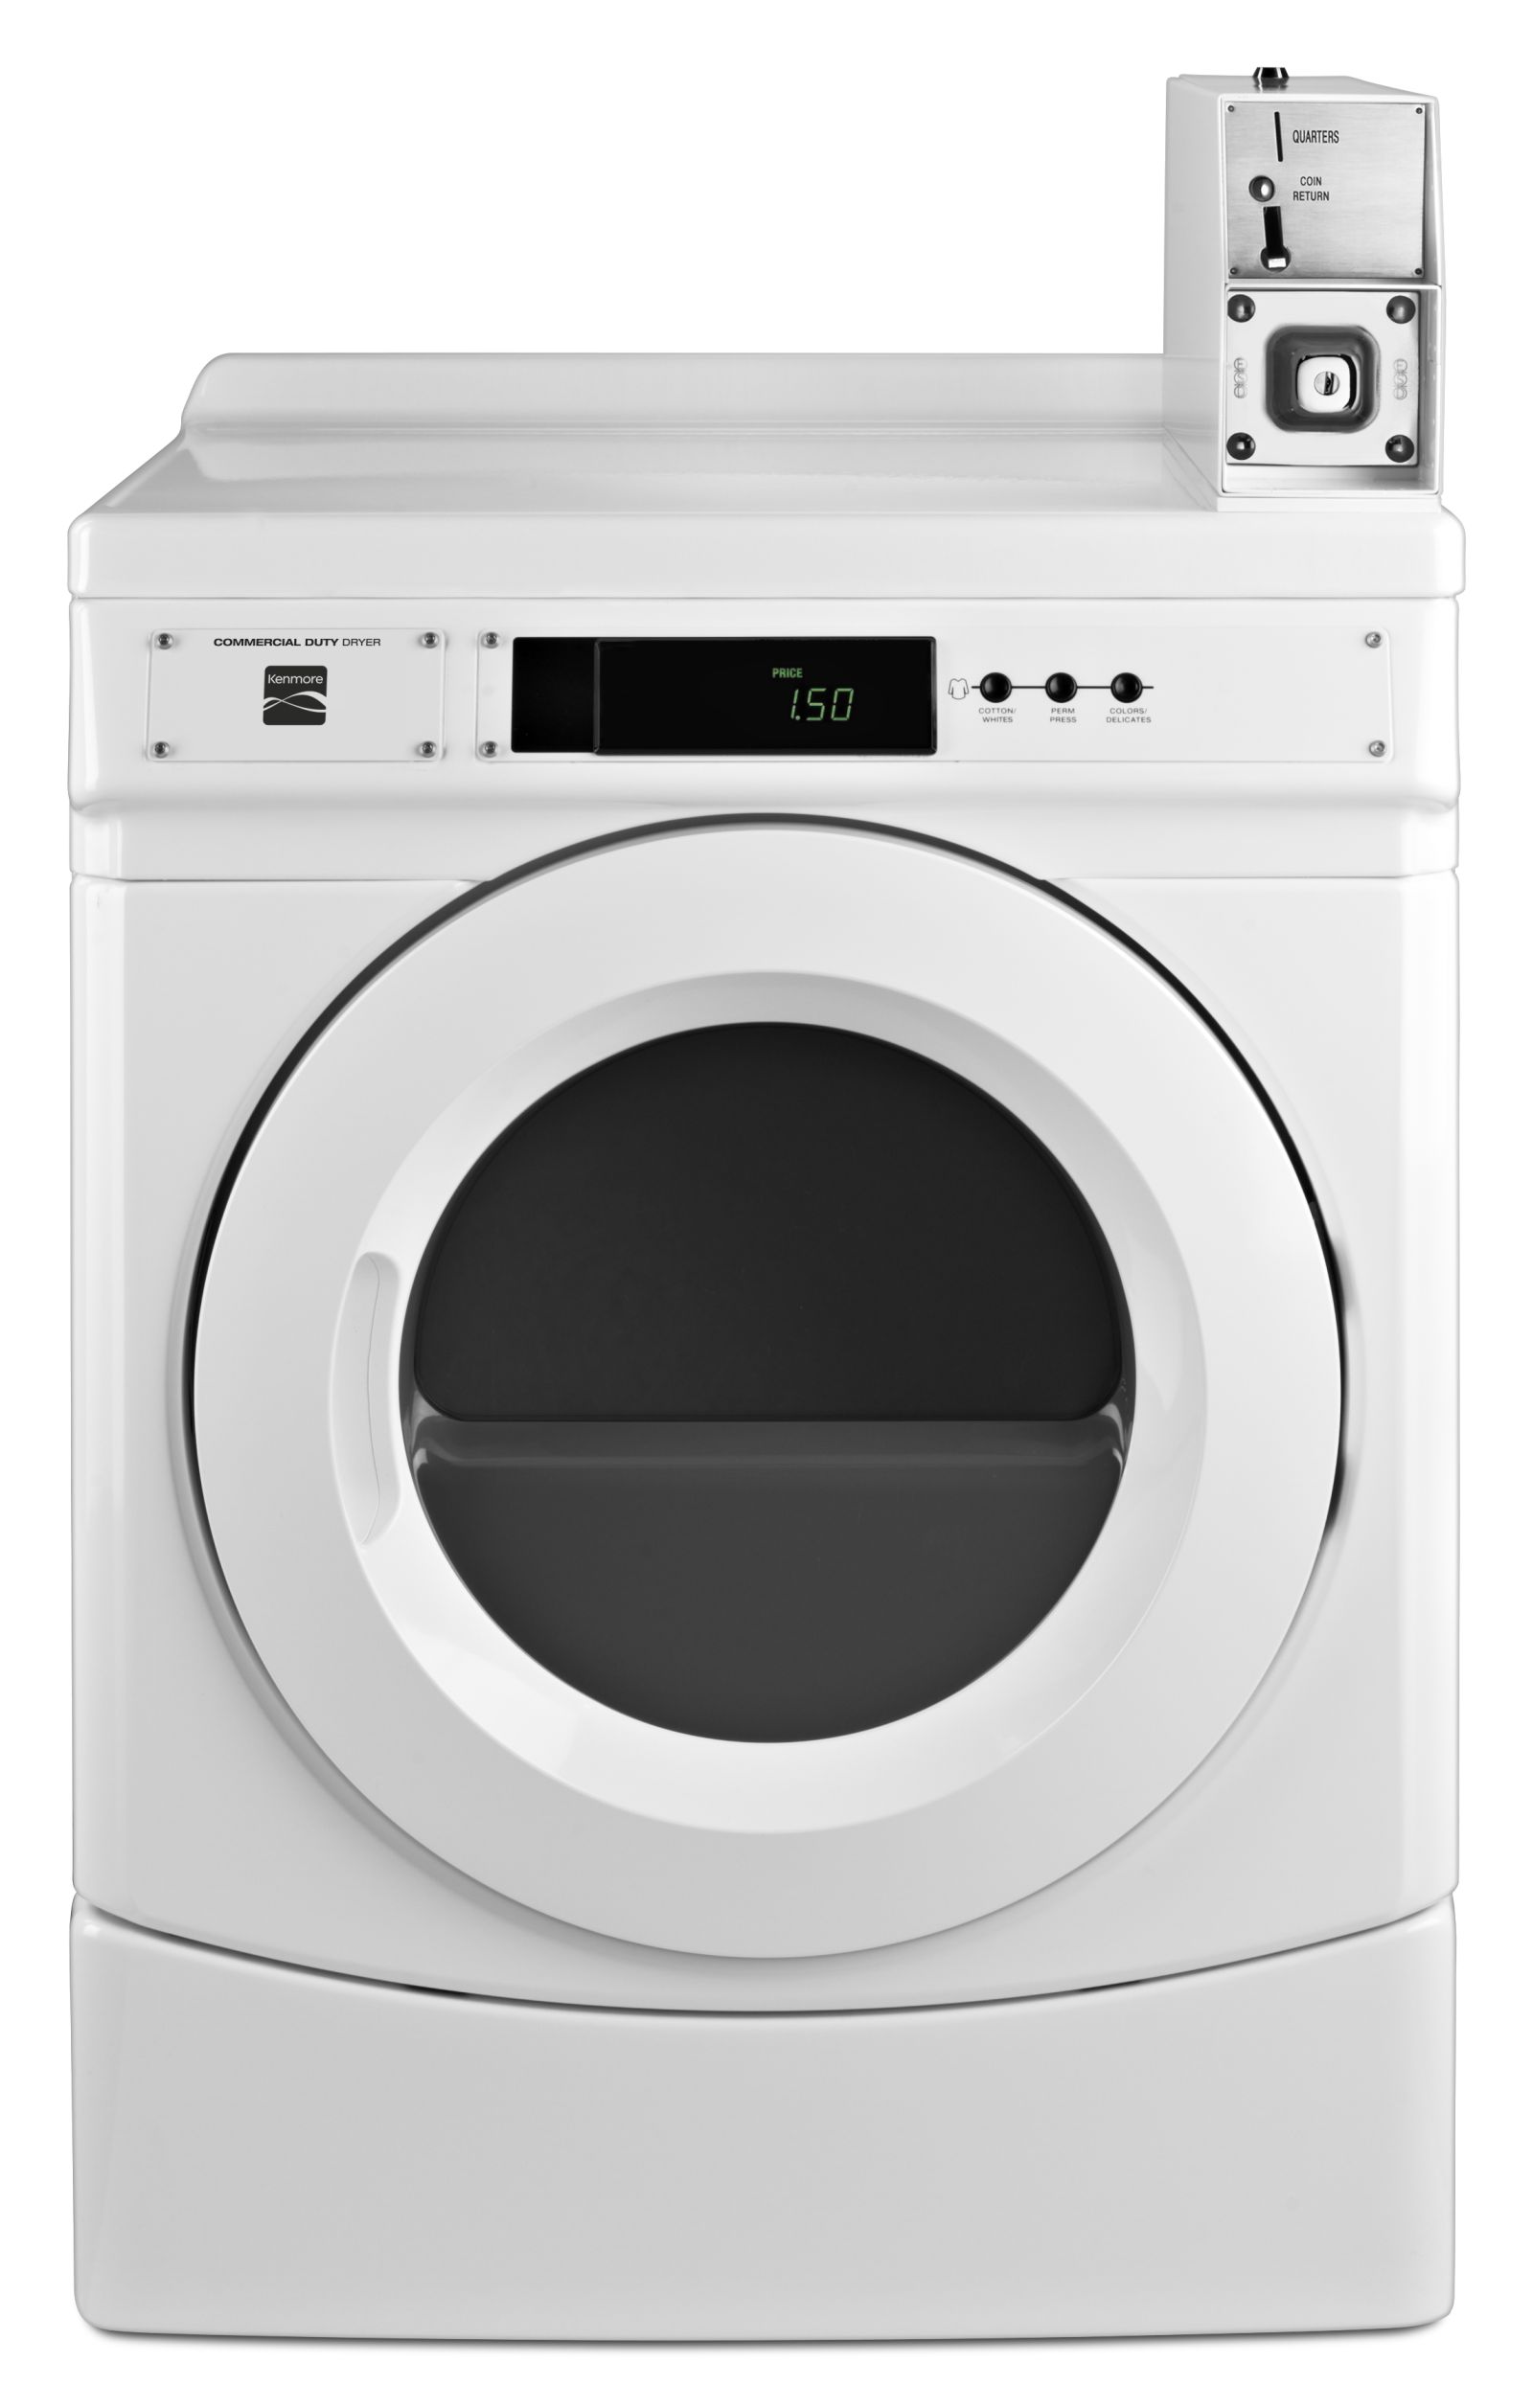 Kenmore 91952 6.7 cu. ft. Coin-Operated Commercial Gas Dryer - White